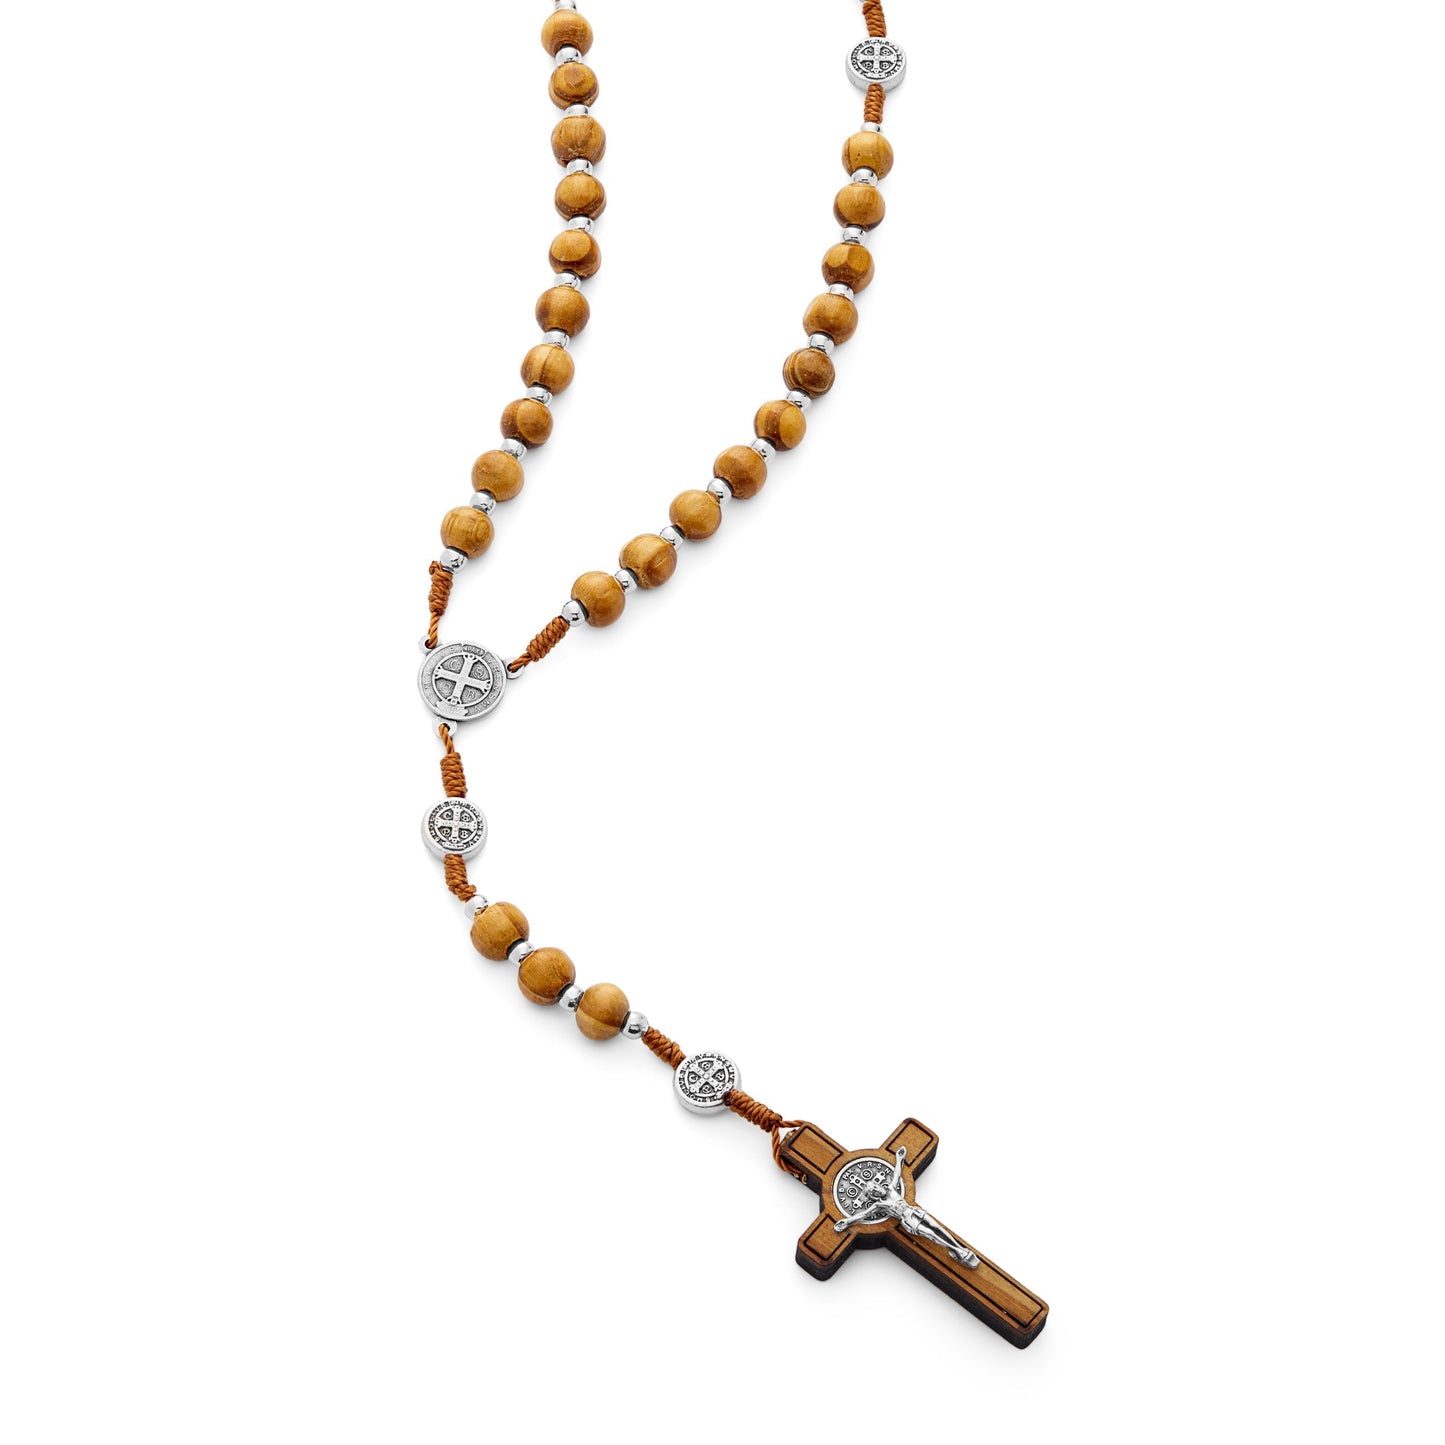 MONDO CATTOLICO Prayer Beads 44 cm (17.32 in) / 6 mm (0.23 in) Round Wooden Rosary of Saint Benedict